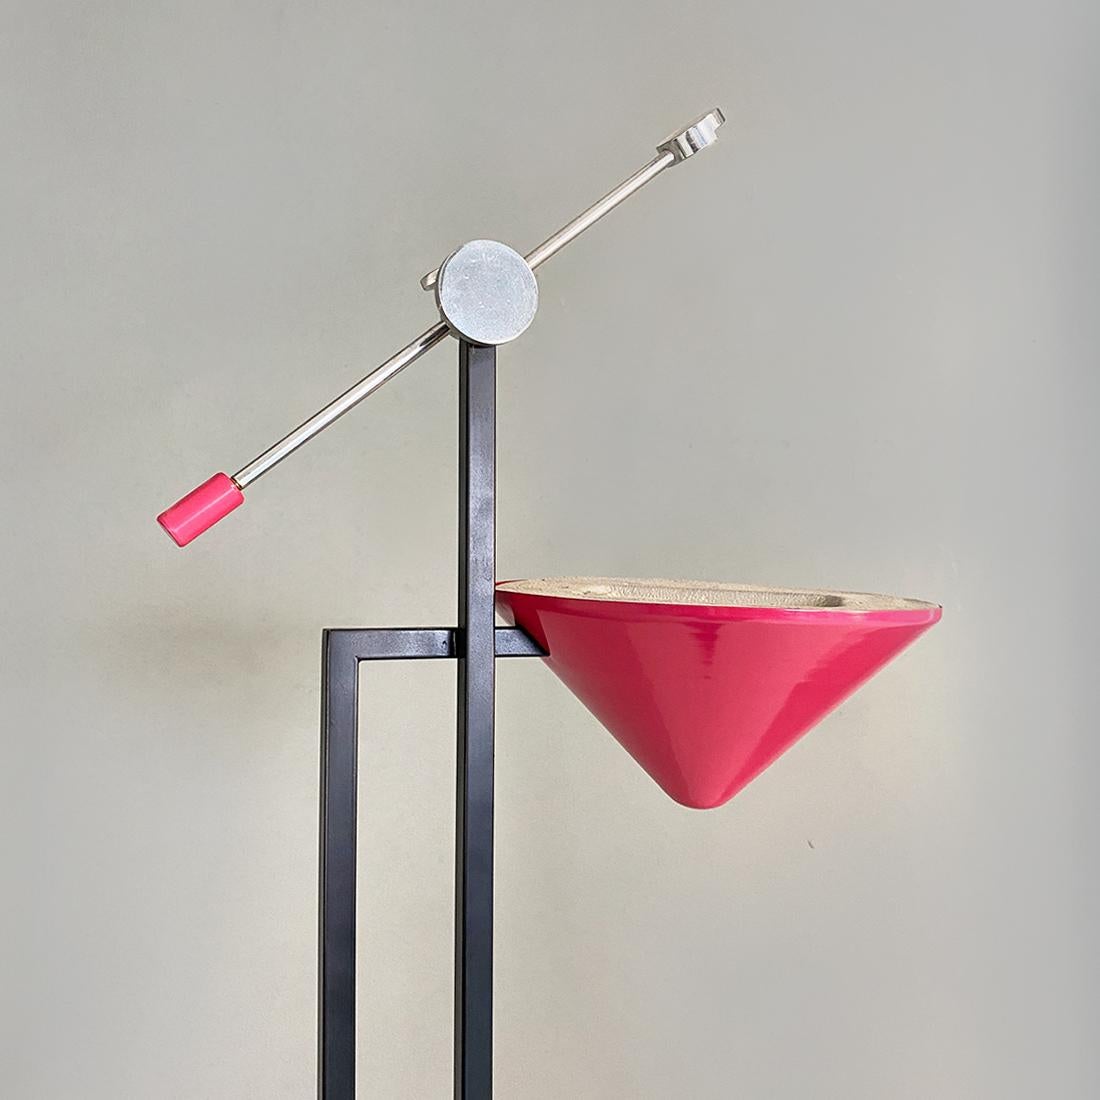 Italian Modern Metal Structure and Magenta Conical Diffuser Floor Lamp, 1980s For Sale 2